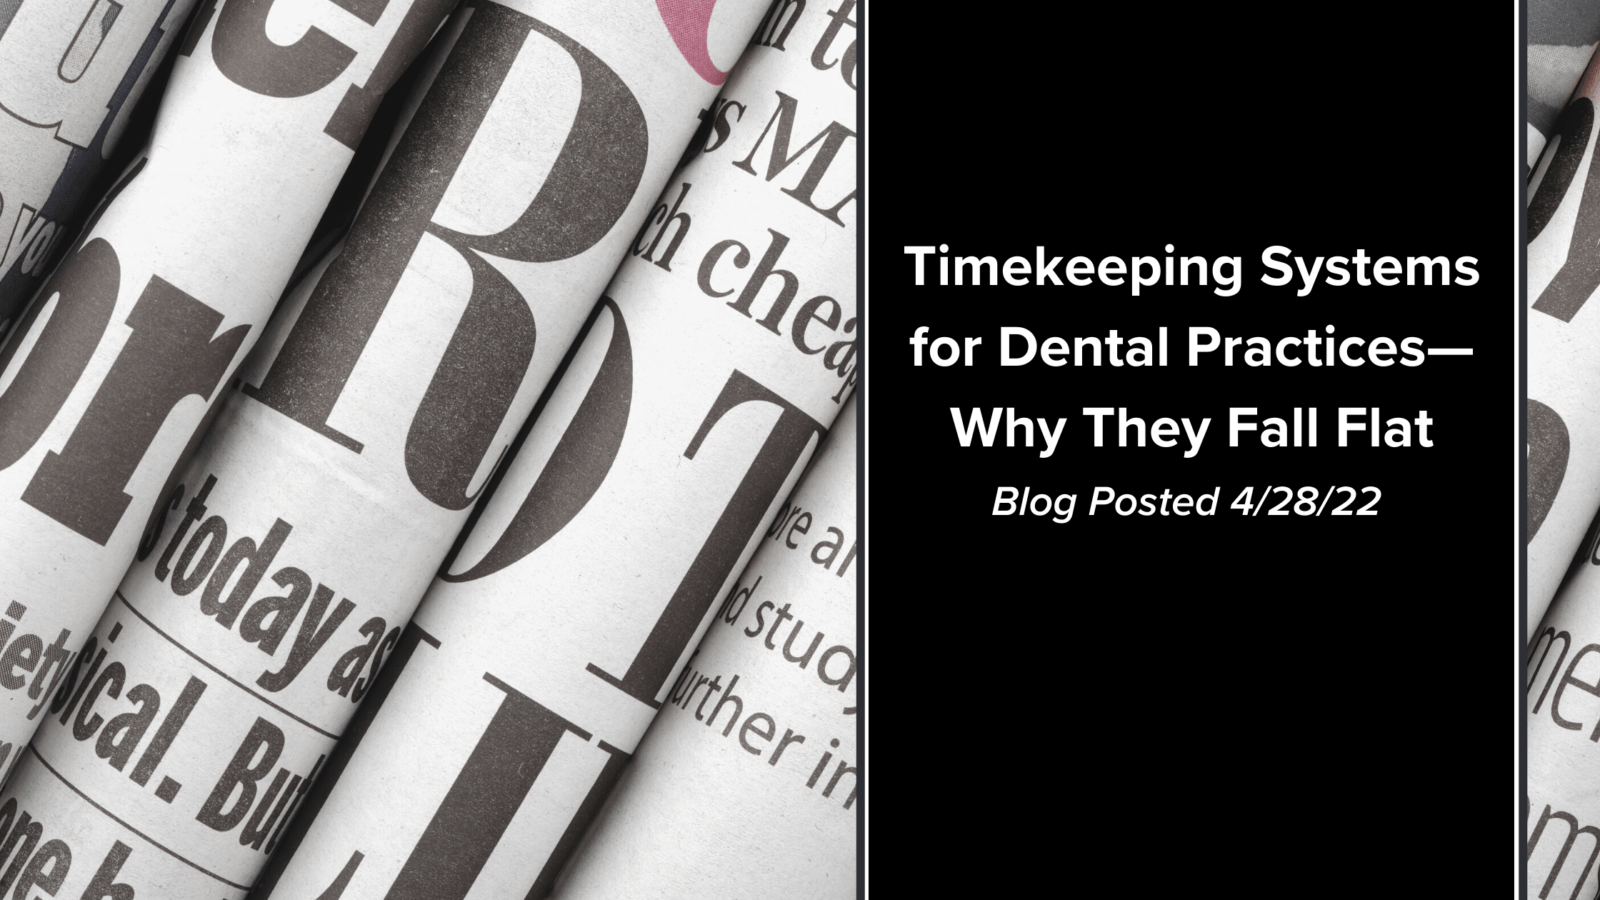 Timekeeping Systems for Dental Practices—Why They Fall Flat